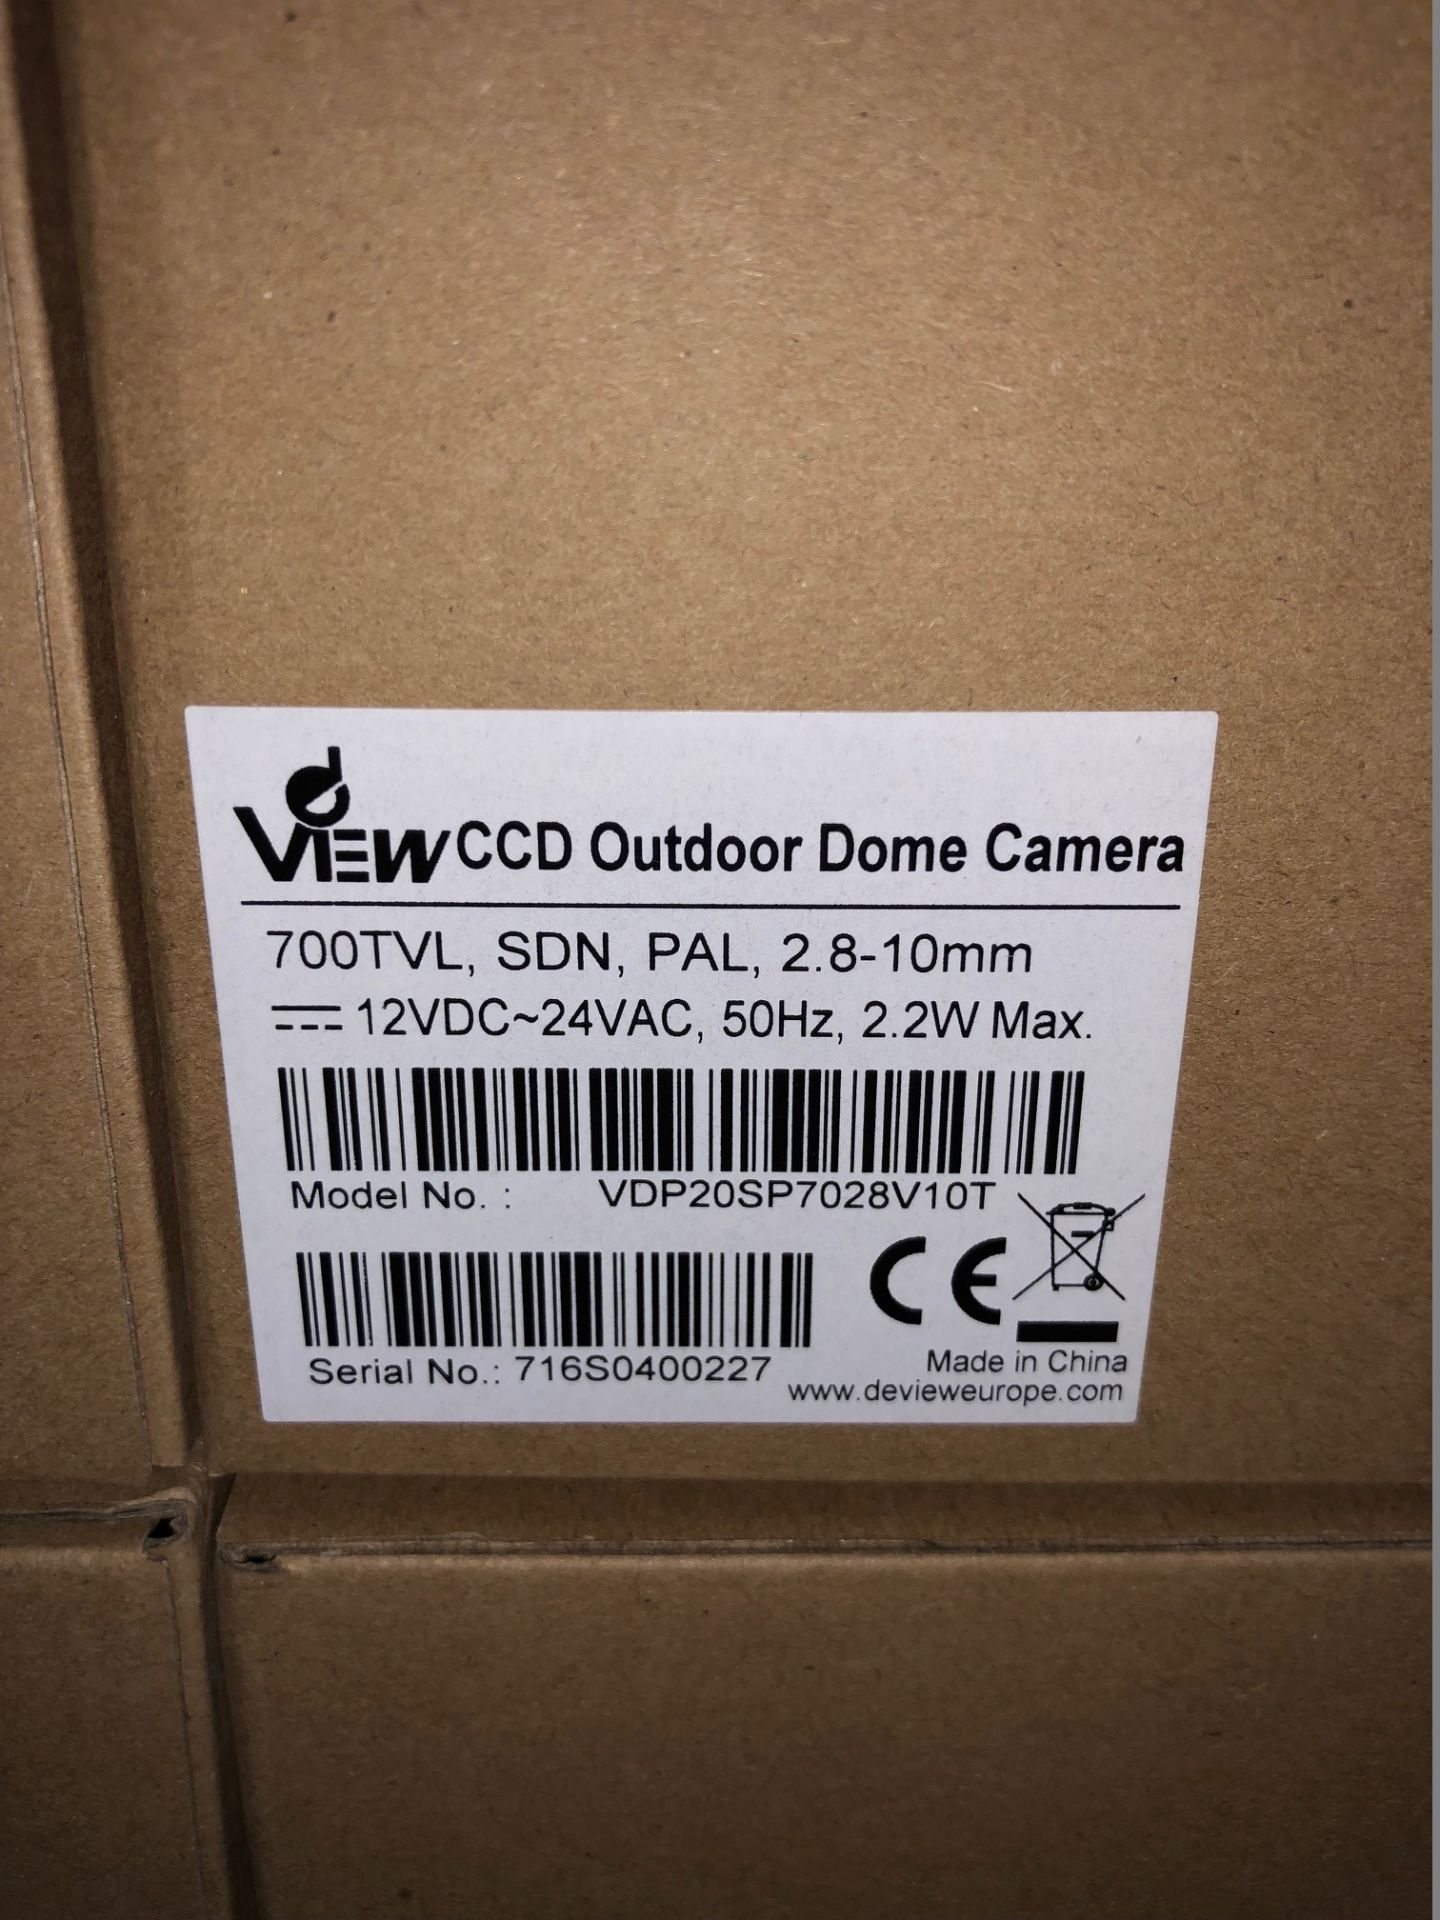 4 x dView CCD Outdoor Dome Cameras - 700TVL, SDN, PAL, 2.8-10mm - Model VDP20SP7028V10T (Brand New & - Image 2 of 3